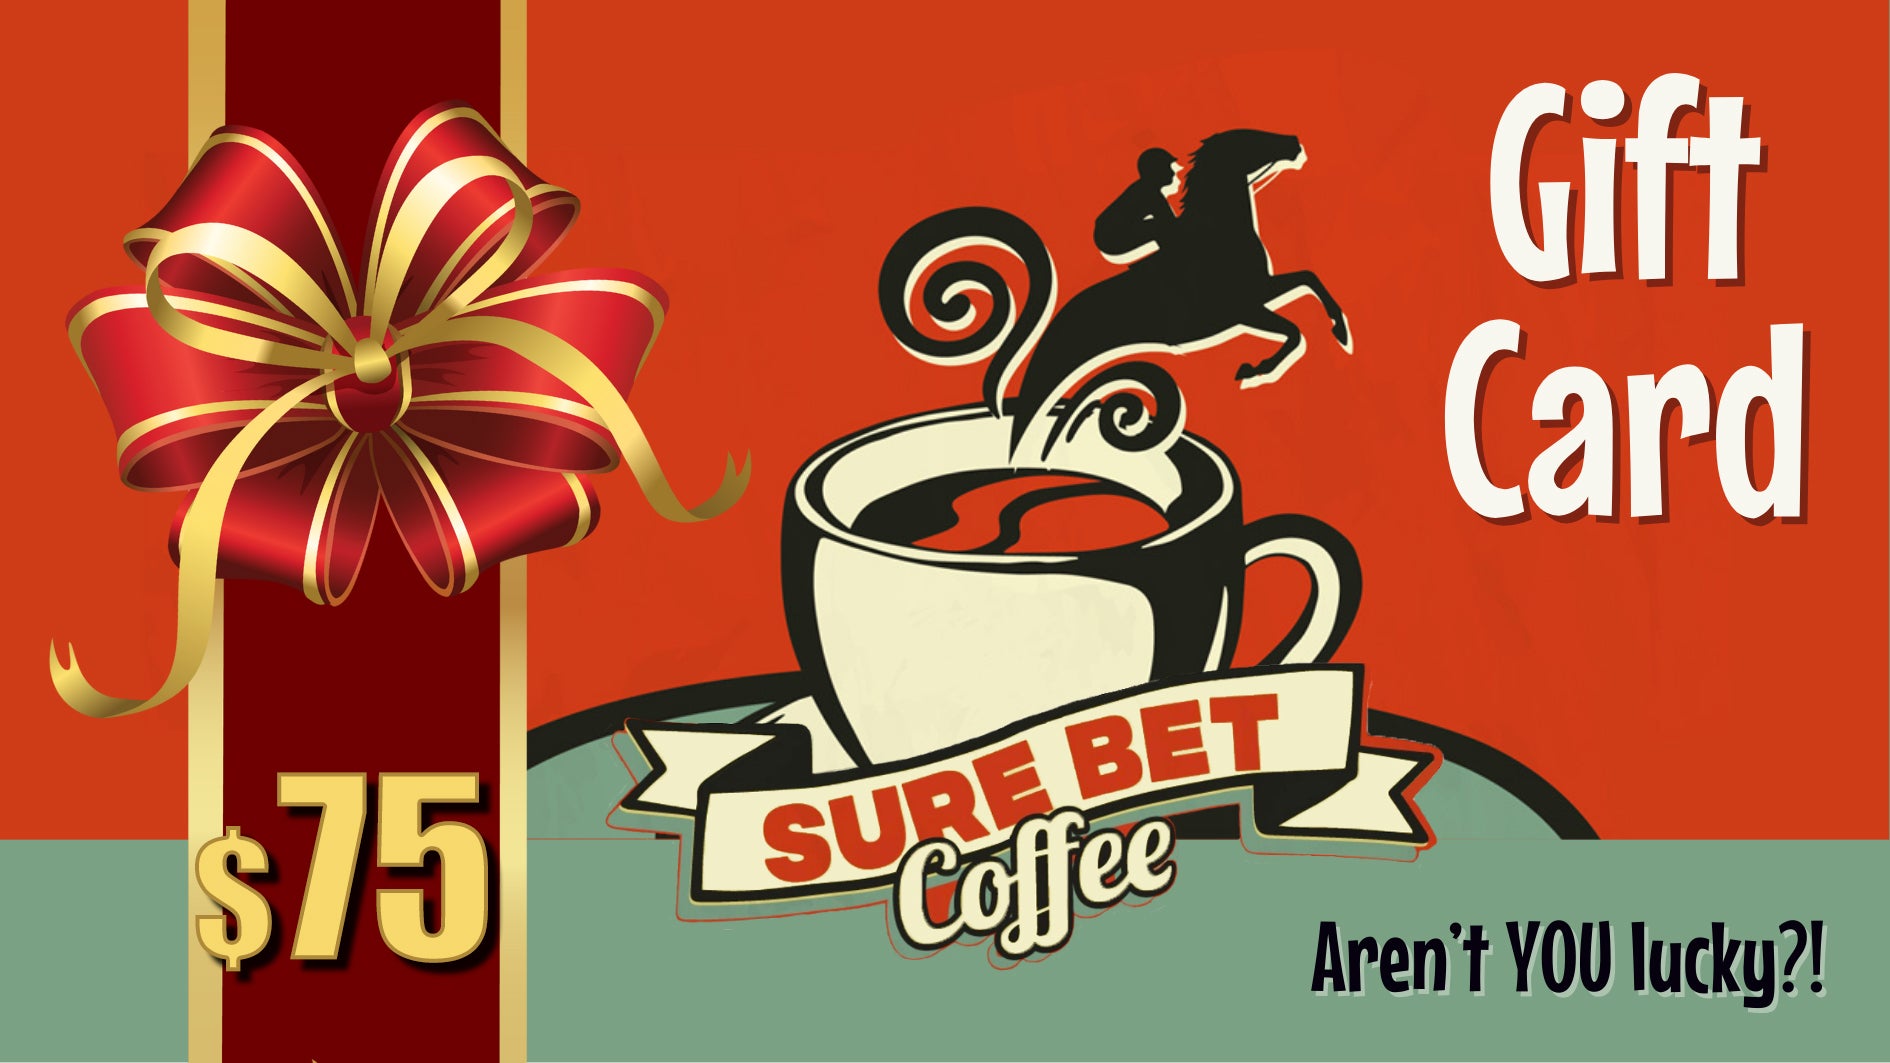 A Sure Bet Coffee $75 Gift Card, redeemable for great ground coffee and snazzy merchandise!